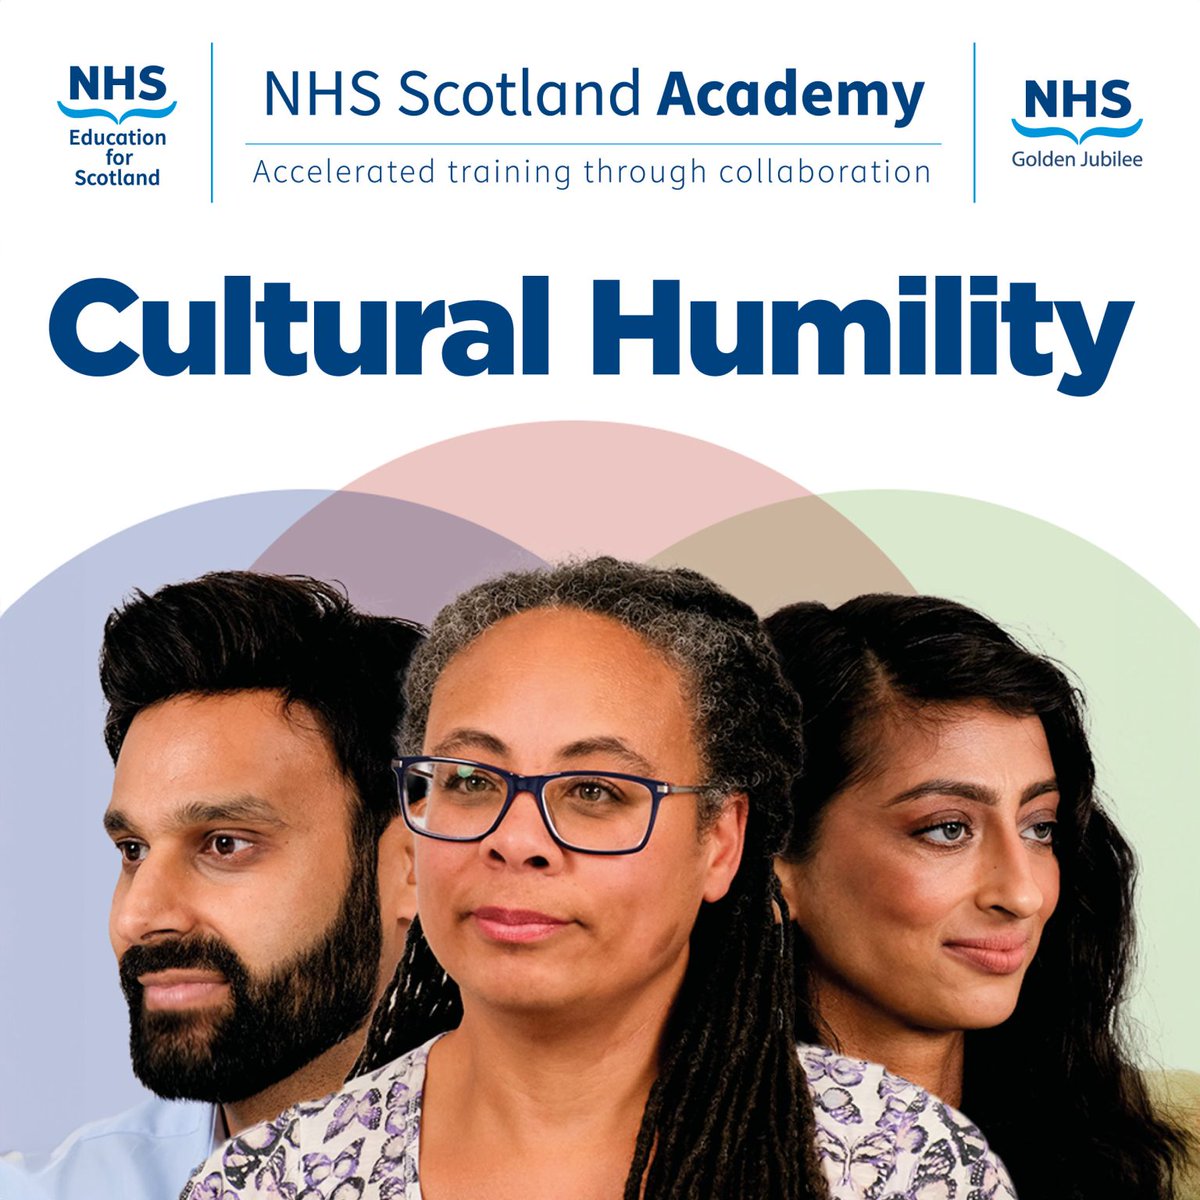 Our Cultural Humility Digital Resource is a national resource designed to support learners to increase their understanding of different cultures and backgrounds, developing their skills to engage in a respectful and meaningful interactions. Learn more👉nhsscotlandacademy.co.uk/programmes/cul…